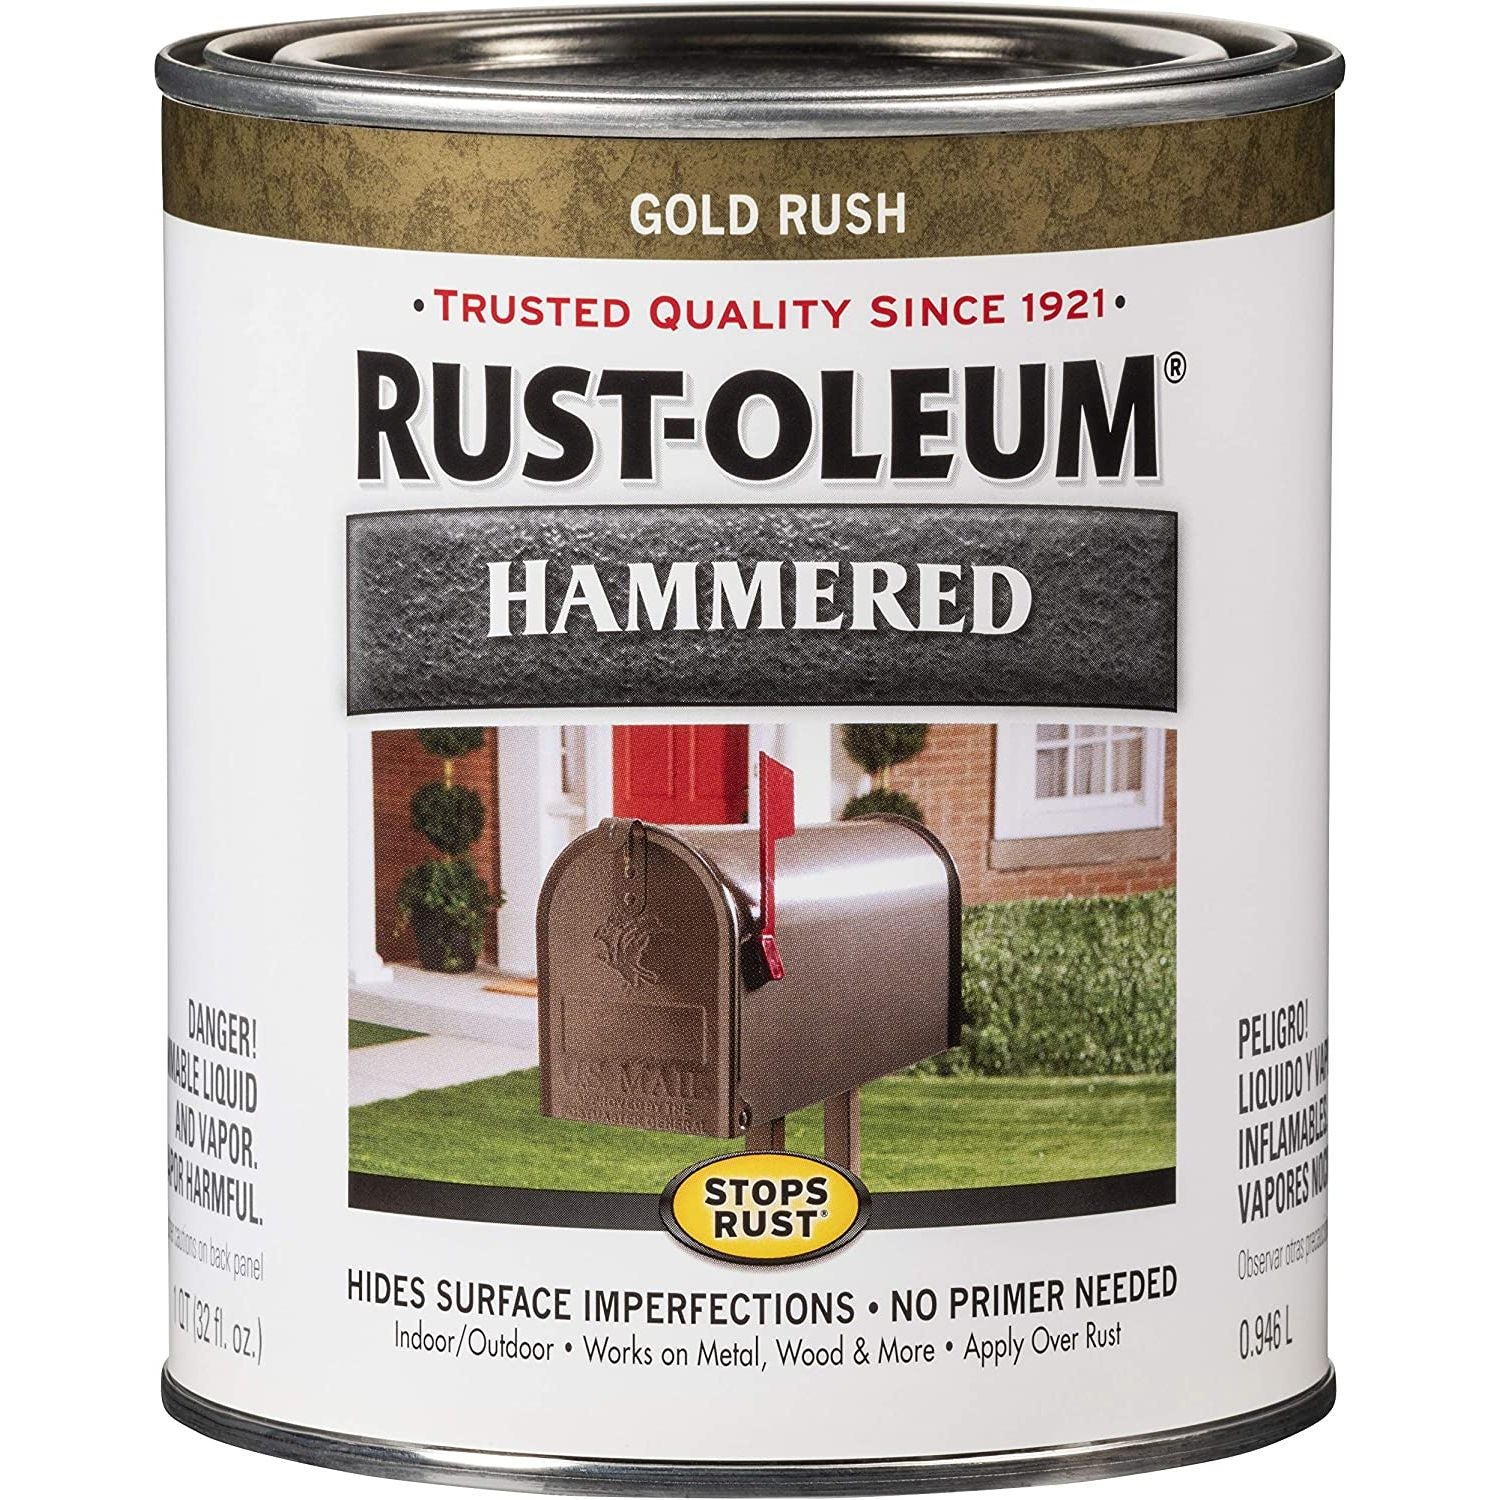 Rustoleum STOPS RUST AND RUST PREVENTION Hammered Brush-On Paint - 946ml | HAMMERED GOLD RUSH - South East Clearance Centre